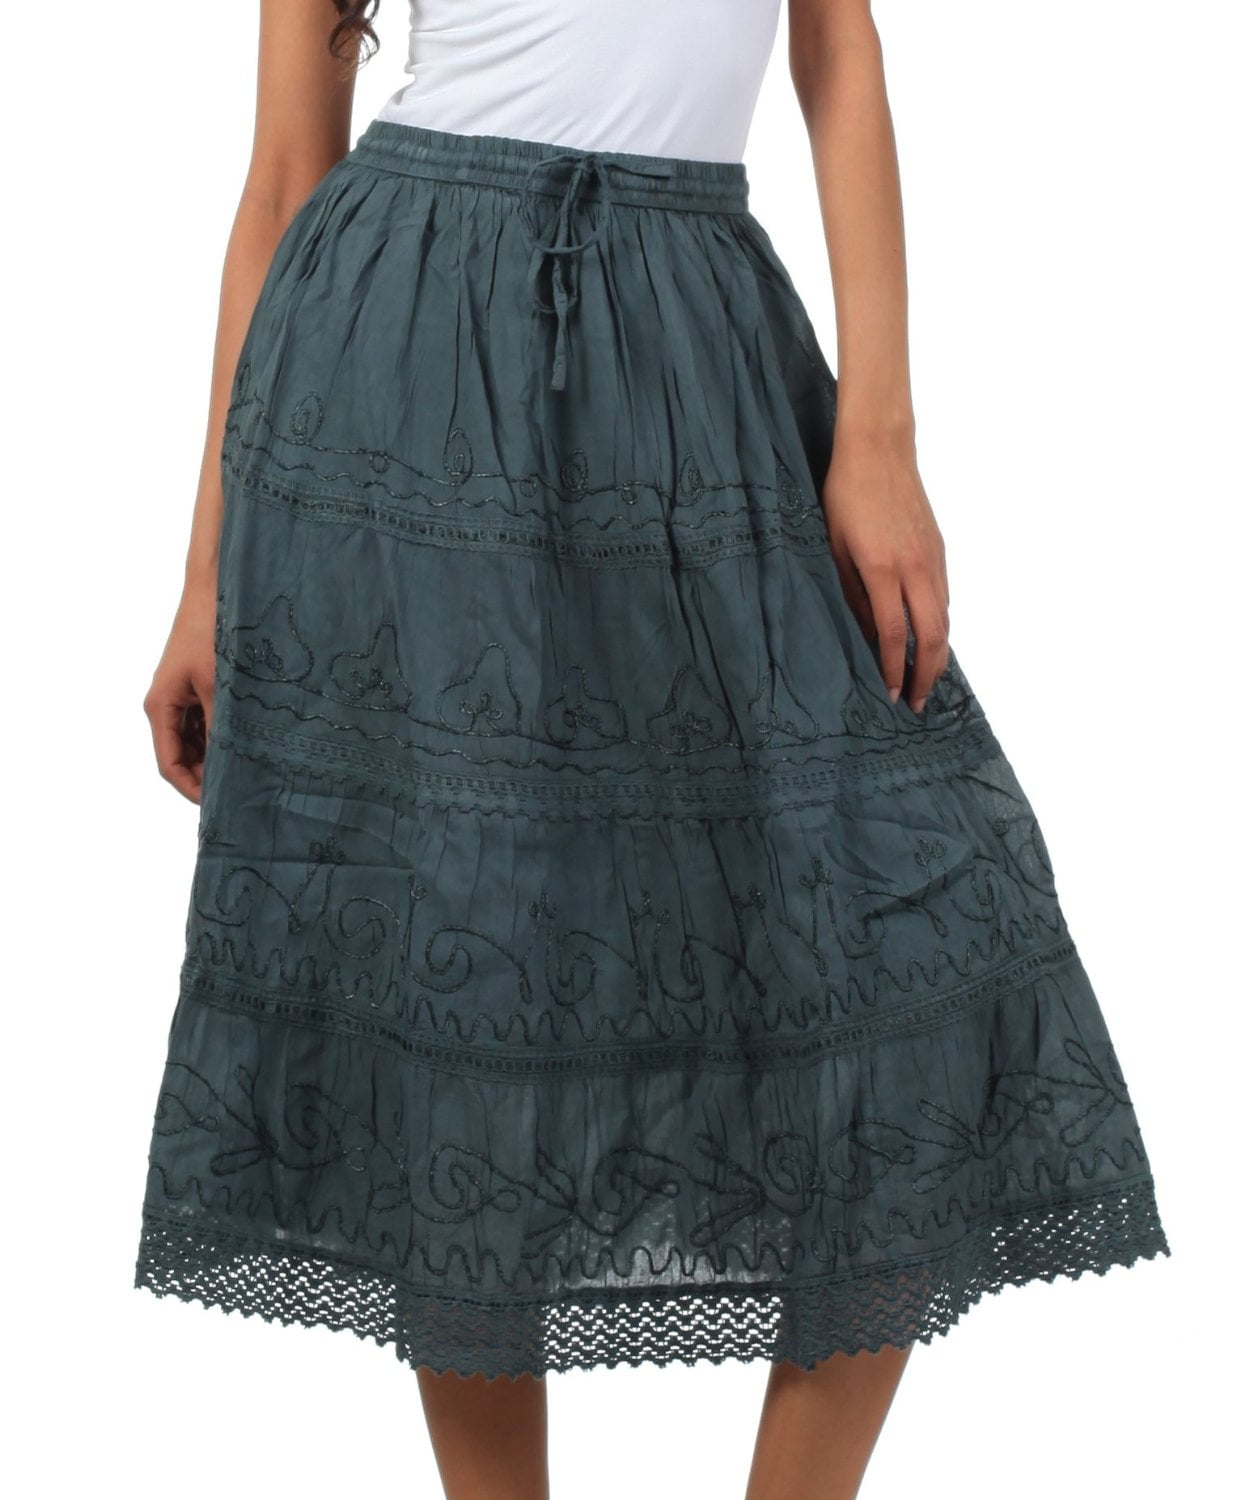 Sakkas Solid Embroidered Crochet Lace Trim Gypsy Bohemian Mid Length Cotton  Skirt - Grey - One Size - Walmart.com